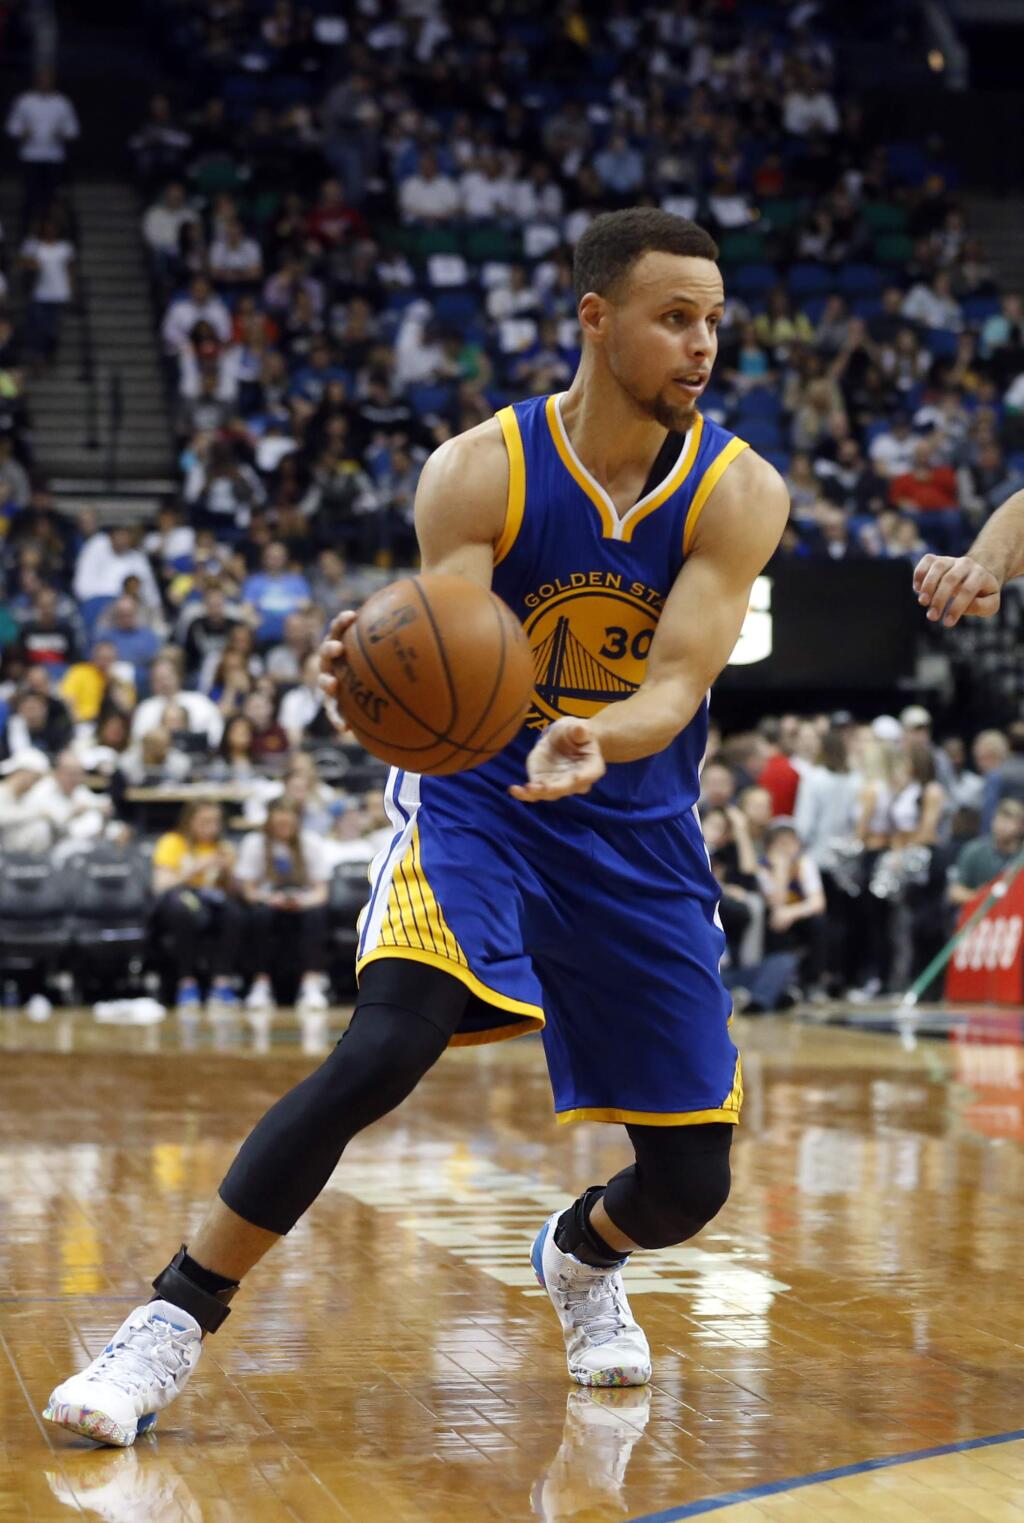 Golden State Warriors' Stephen Curry plays against the Minnesota Timberwolves in the first quarter of an NBA basketball game Monday, March 21, 2016, in Minneapolis. (AP Photo/Jim Mone)